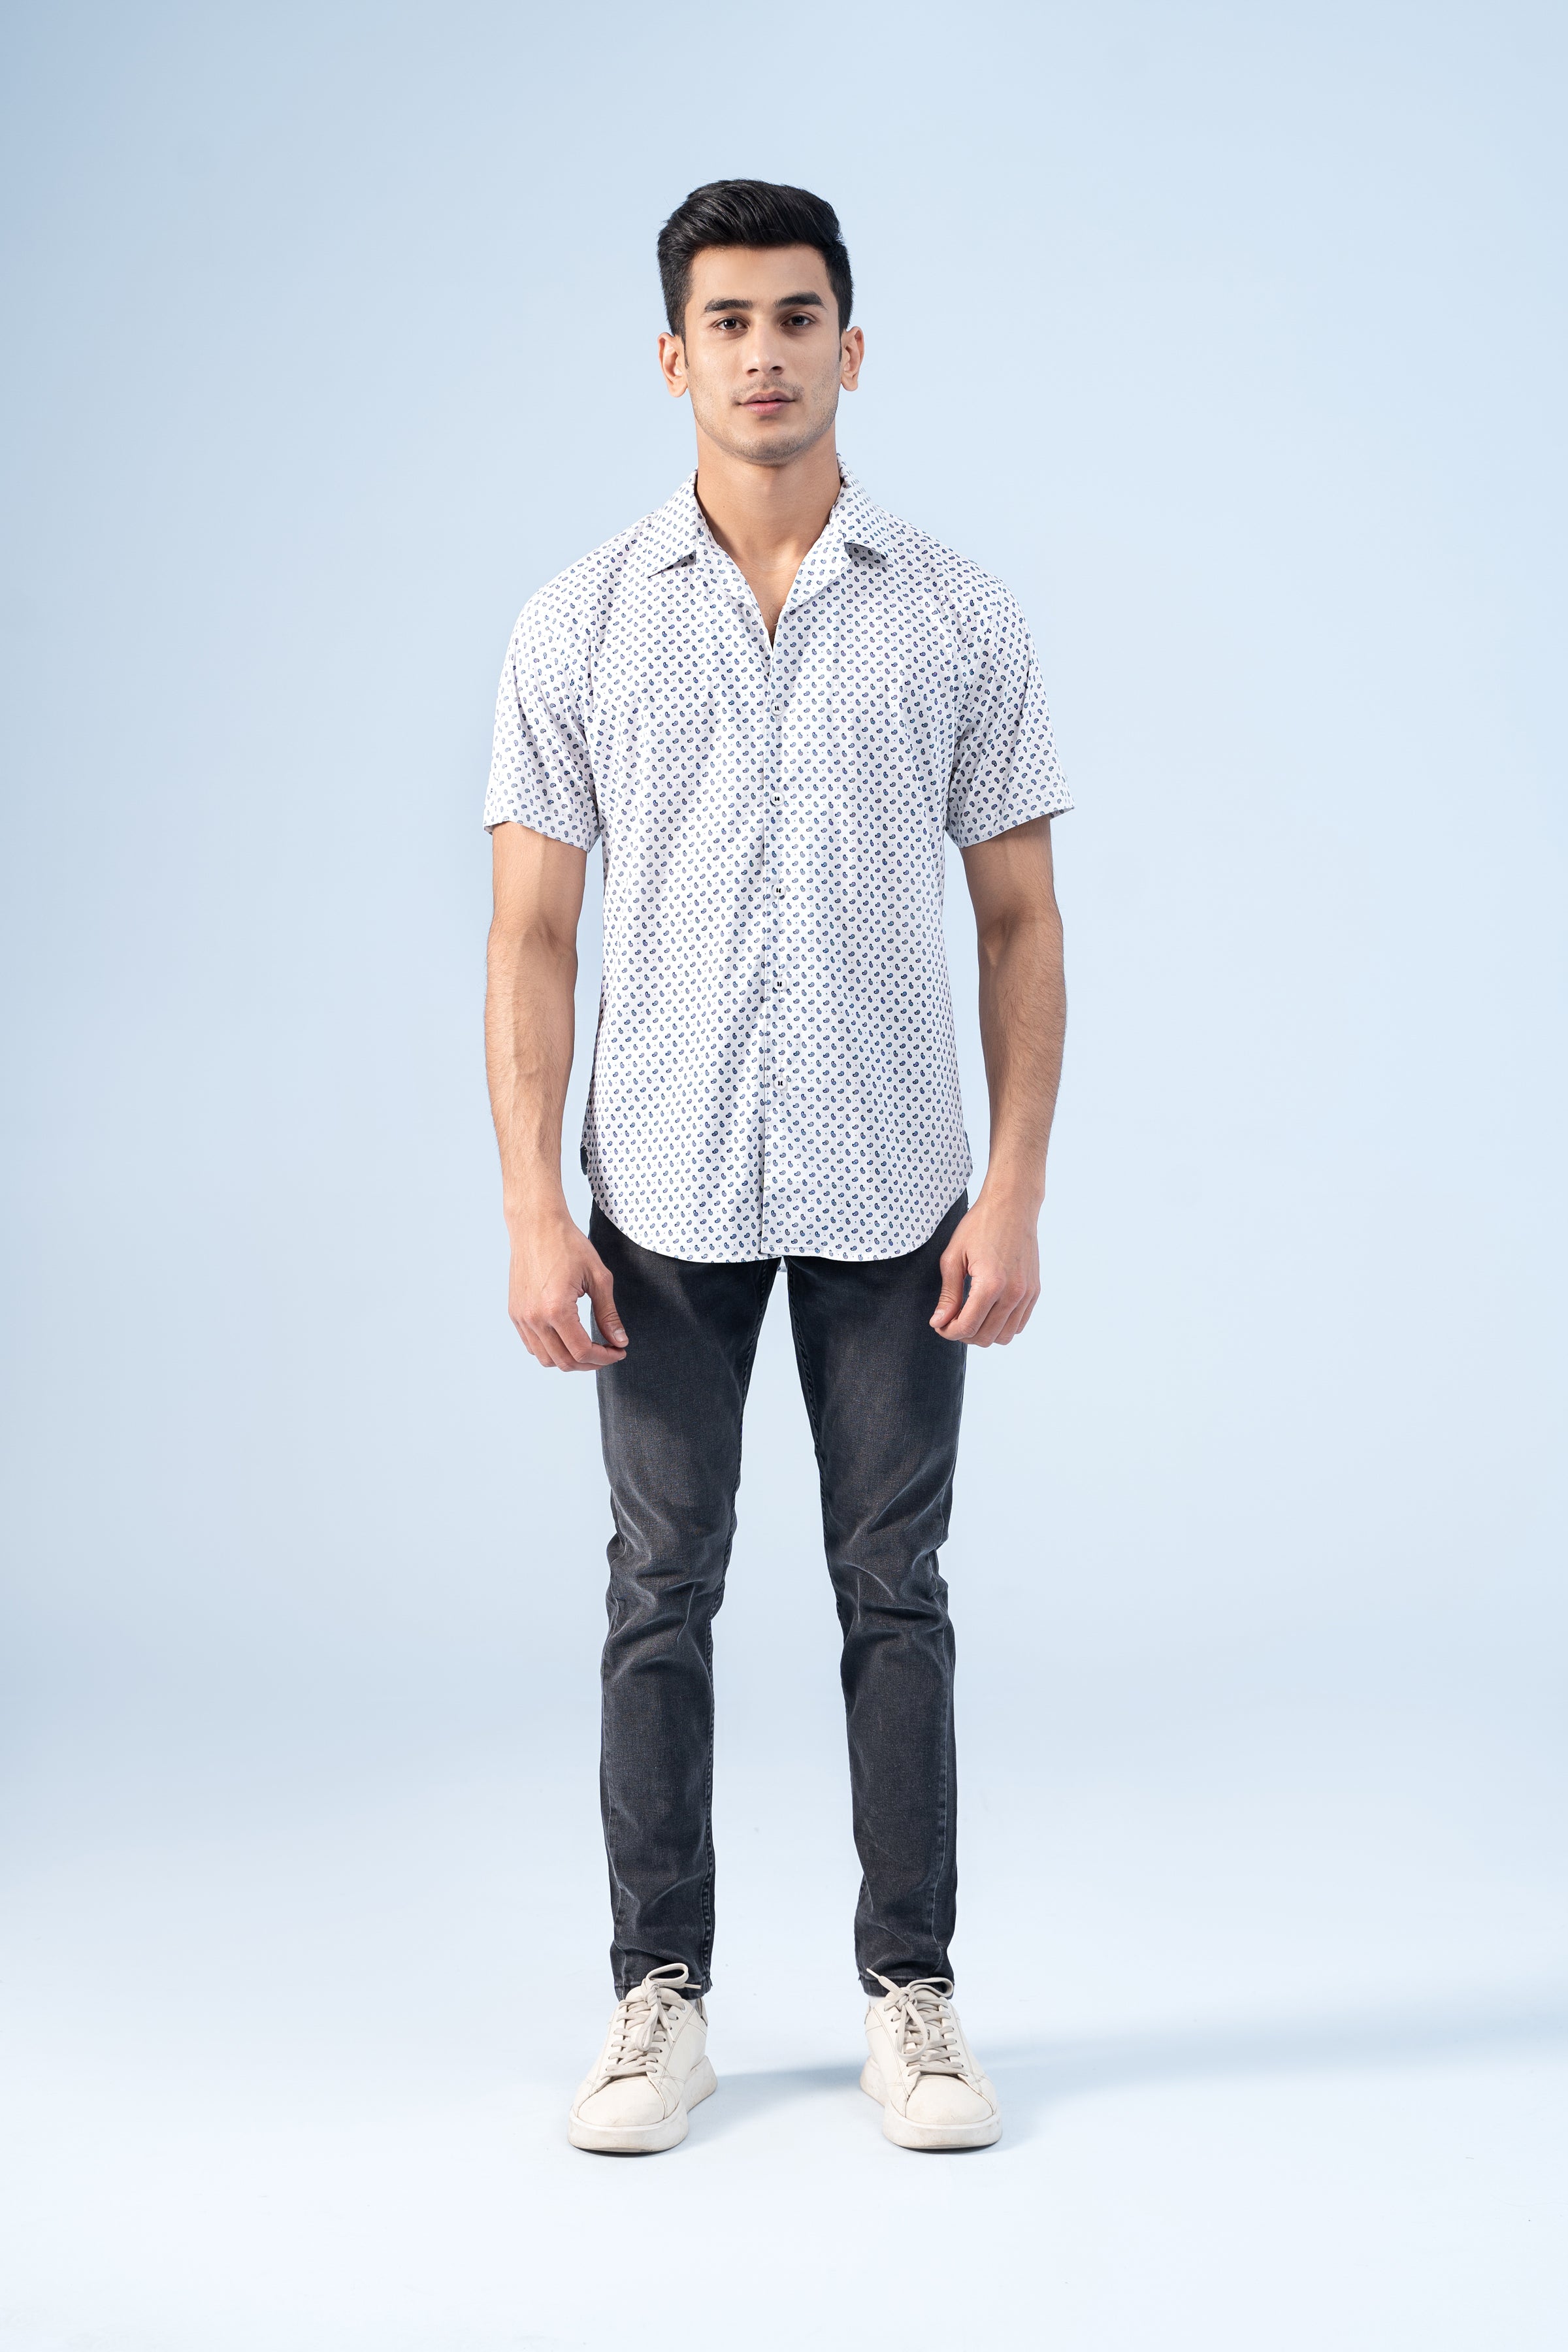 CASUAL SHIRT WHITE - Charcoal Clothing